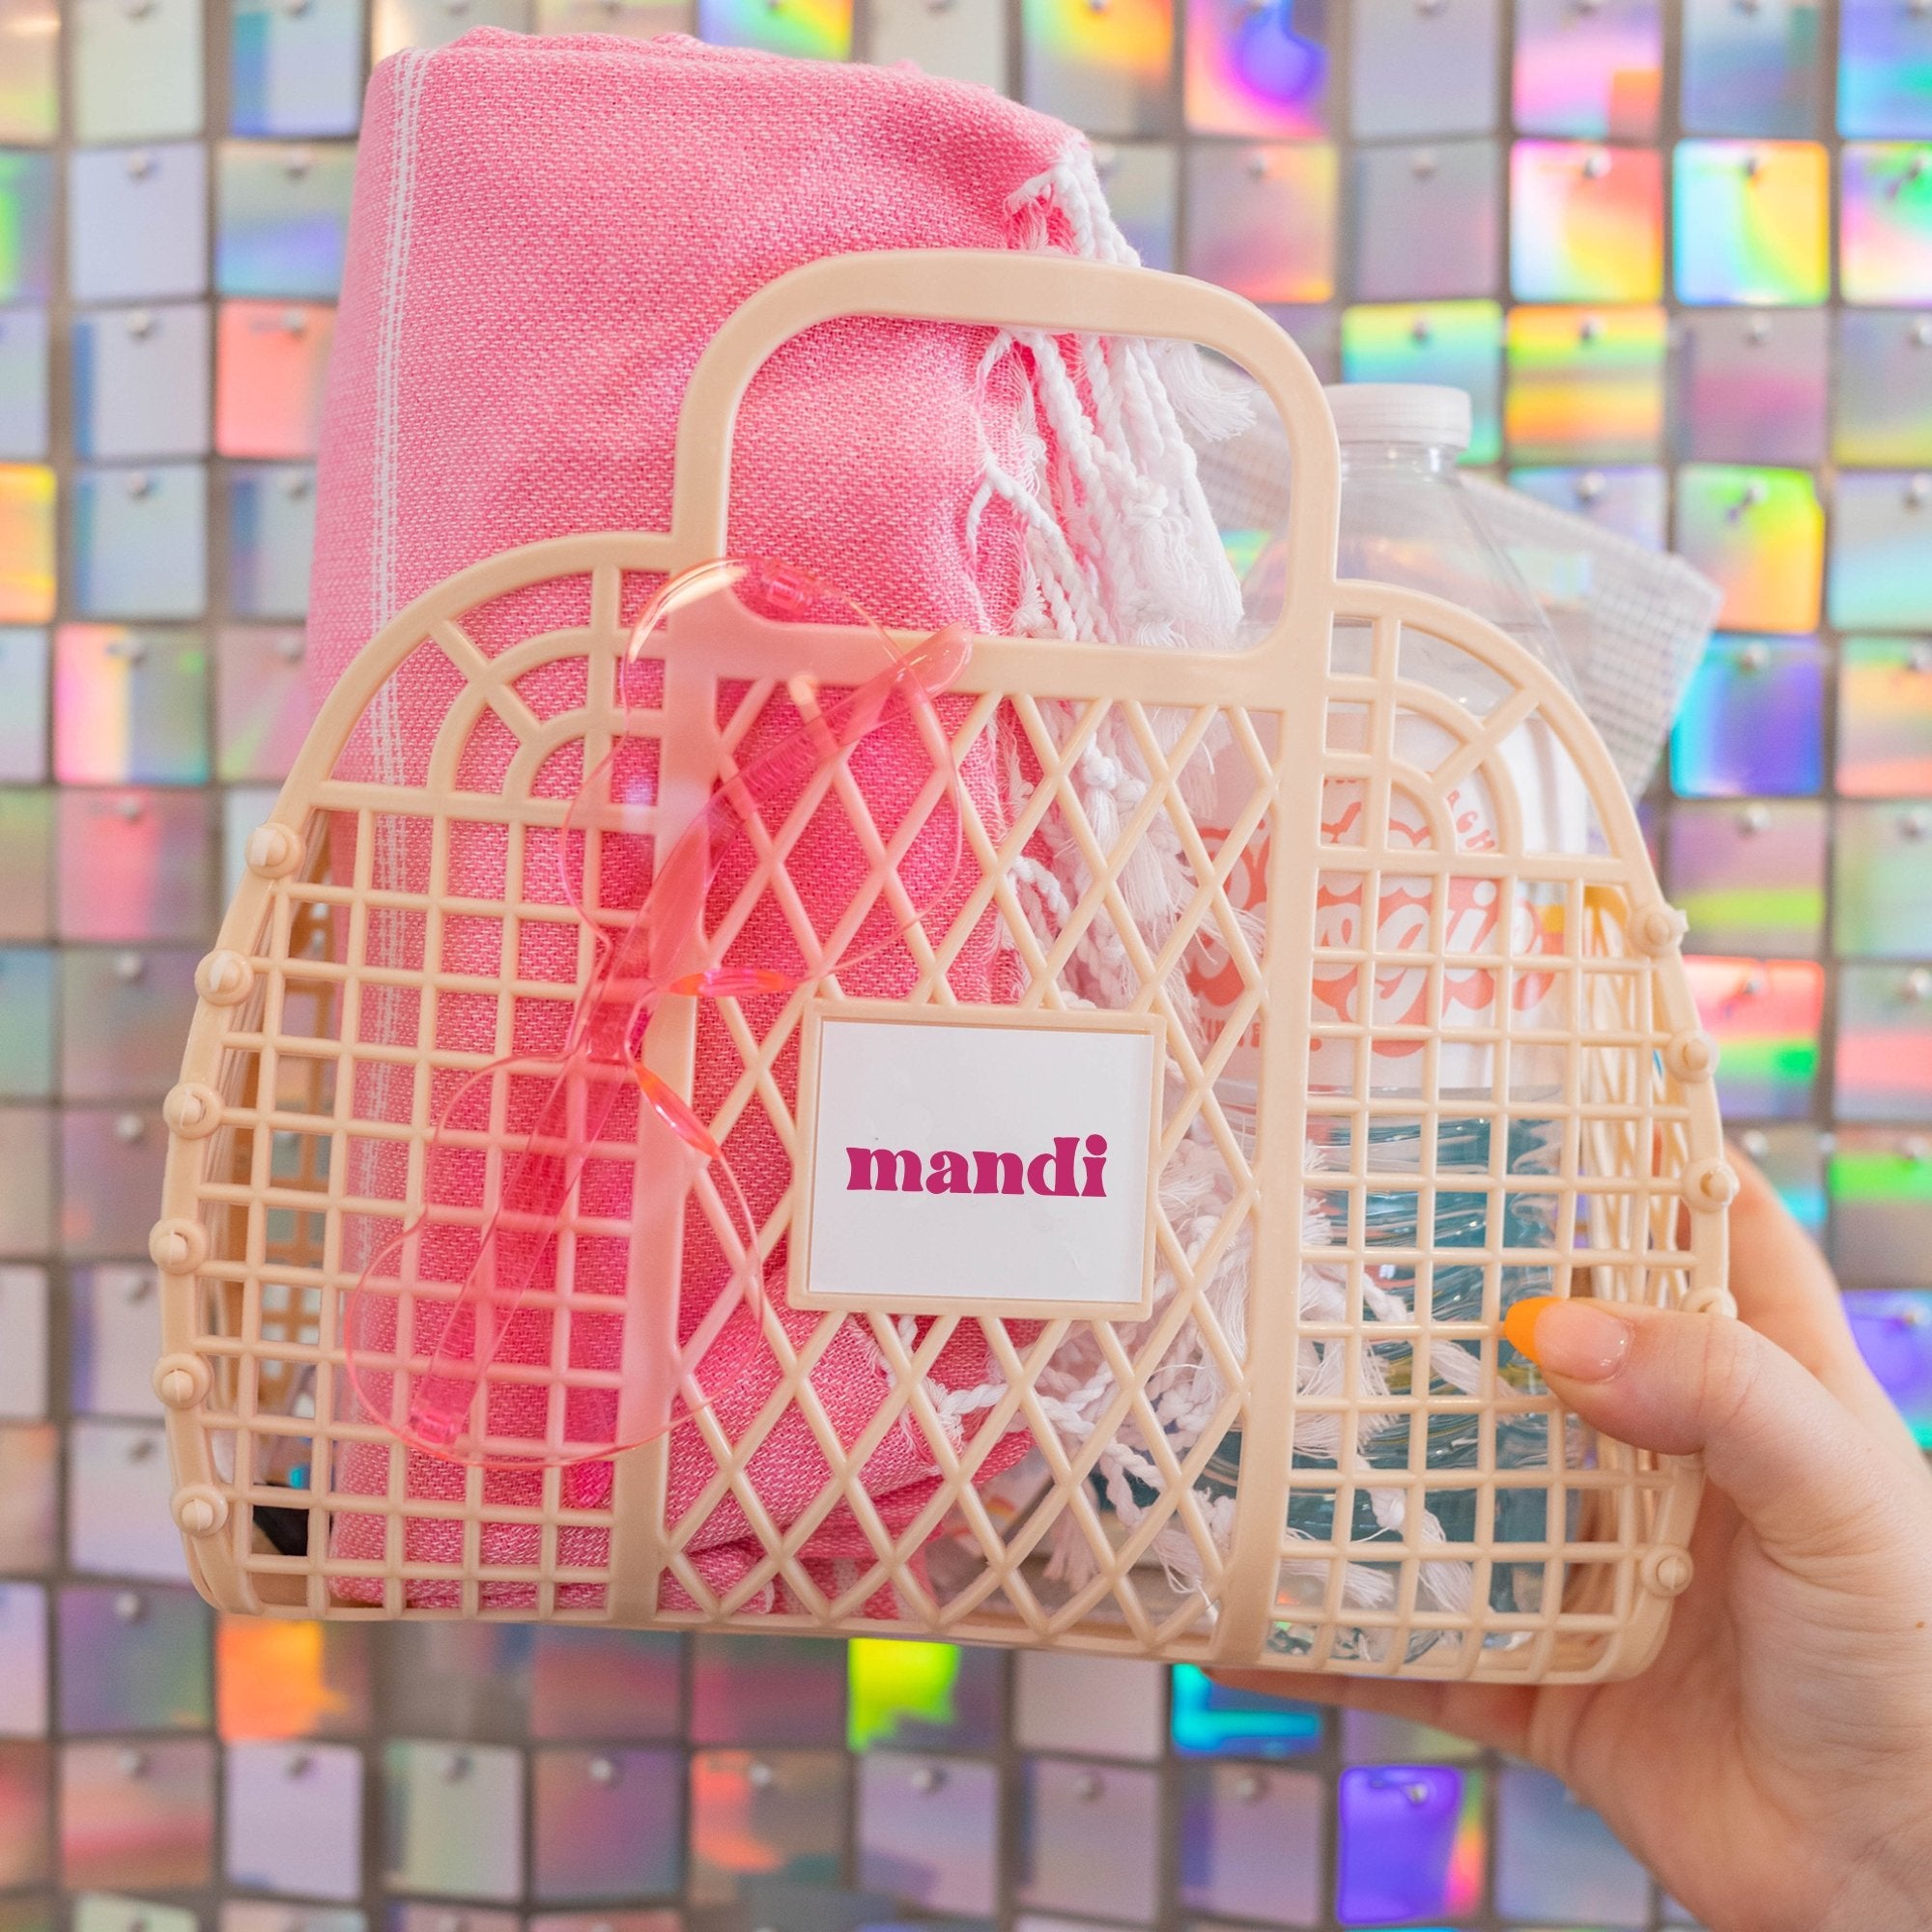 Customized Jelly Bag - Sprinkled With Pink